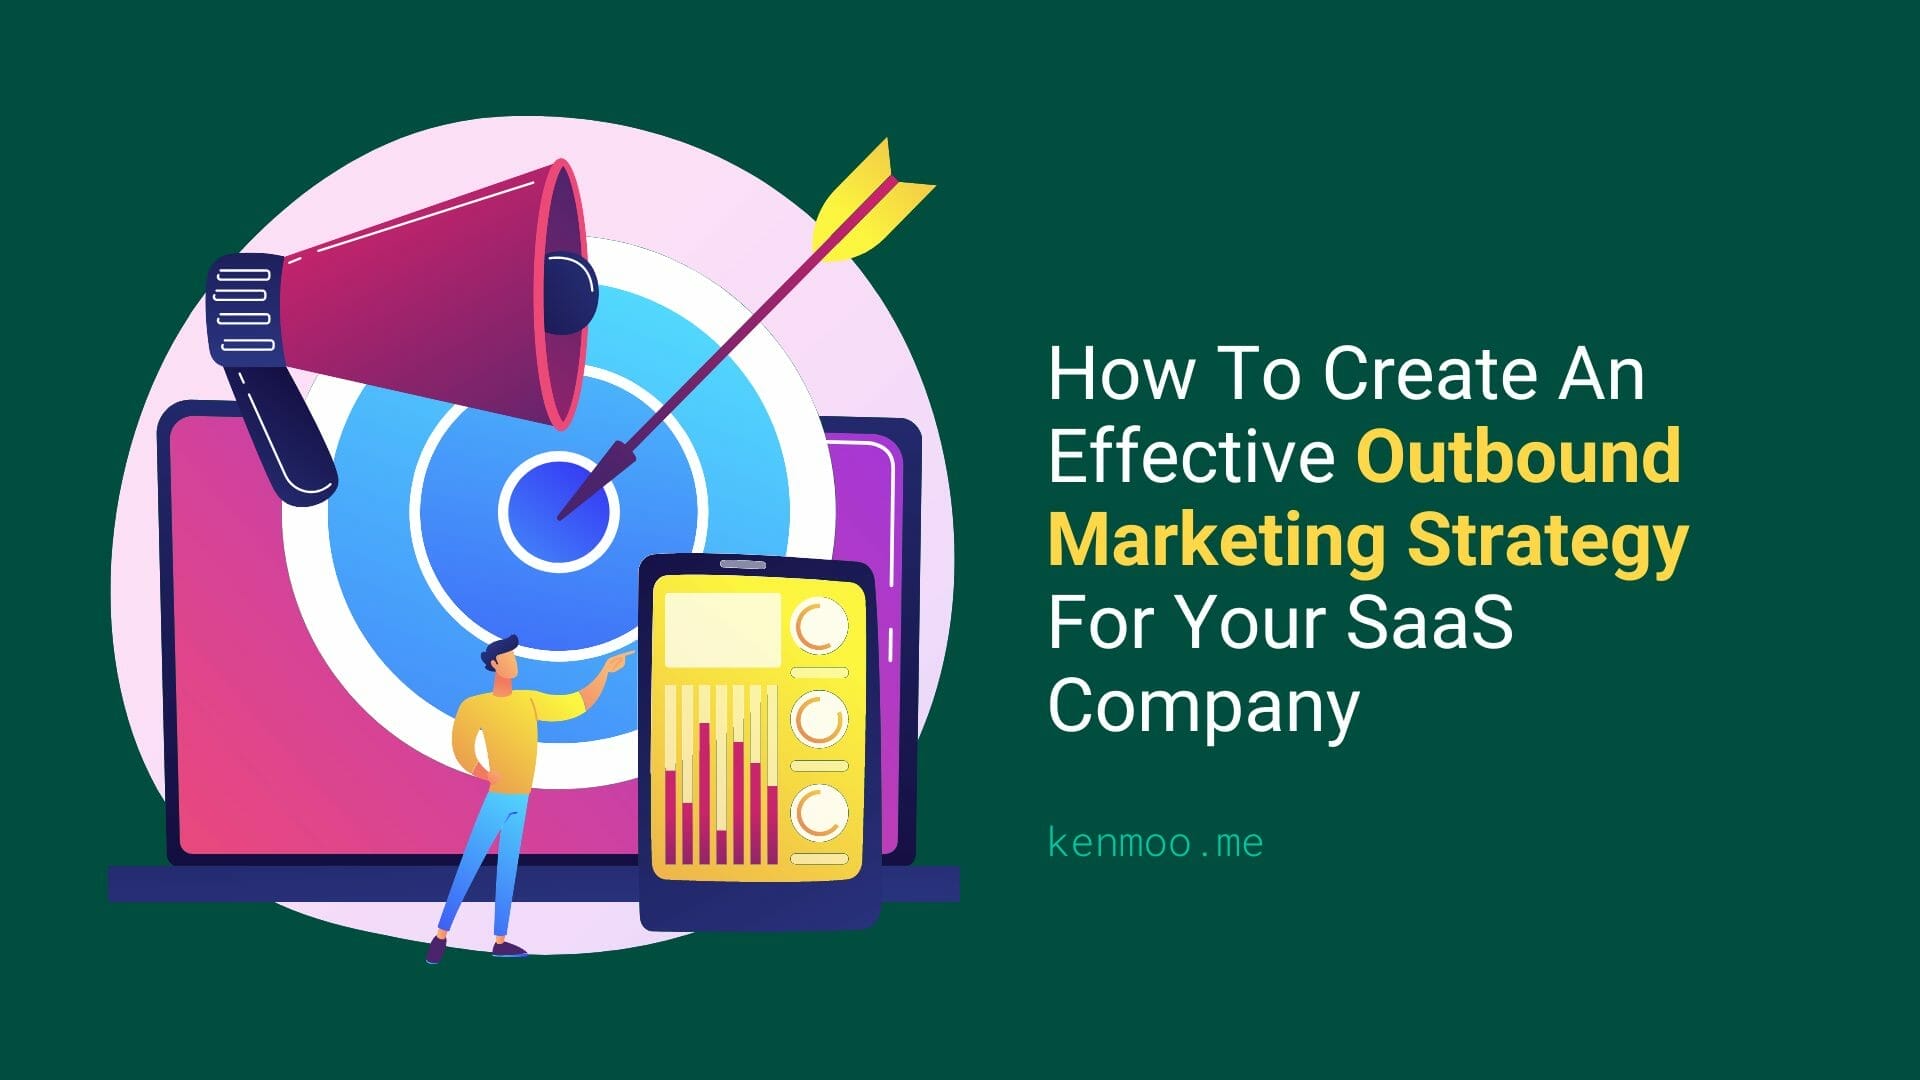 How To Create An Effective Outbound Marketing Strategy For Your SaaS Company